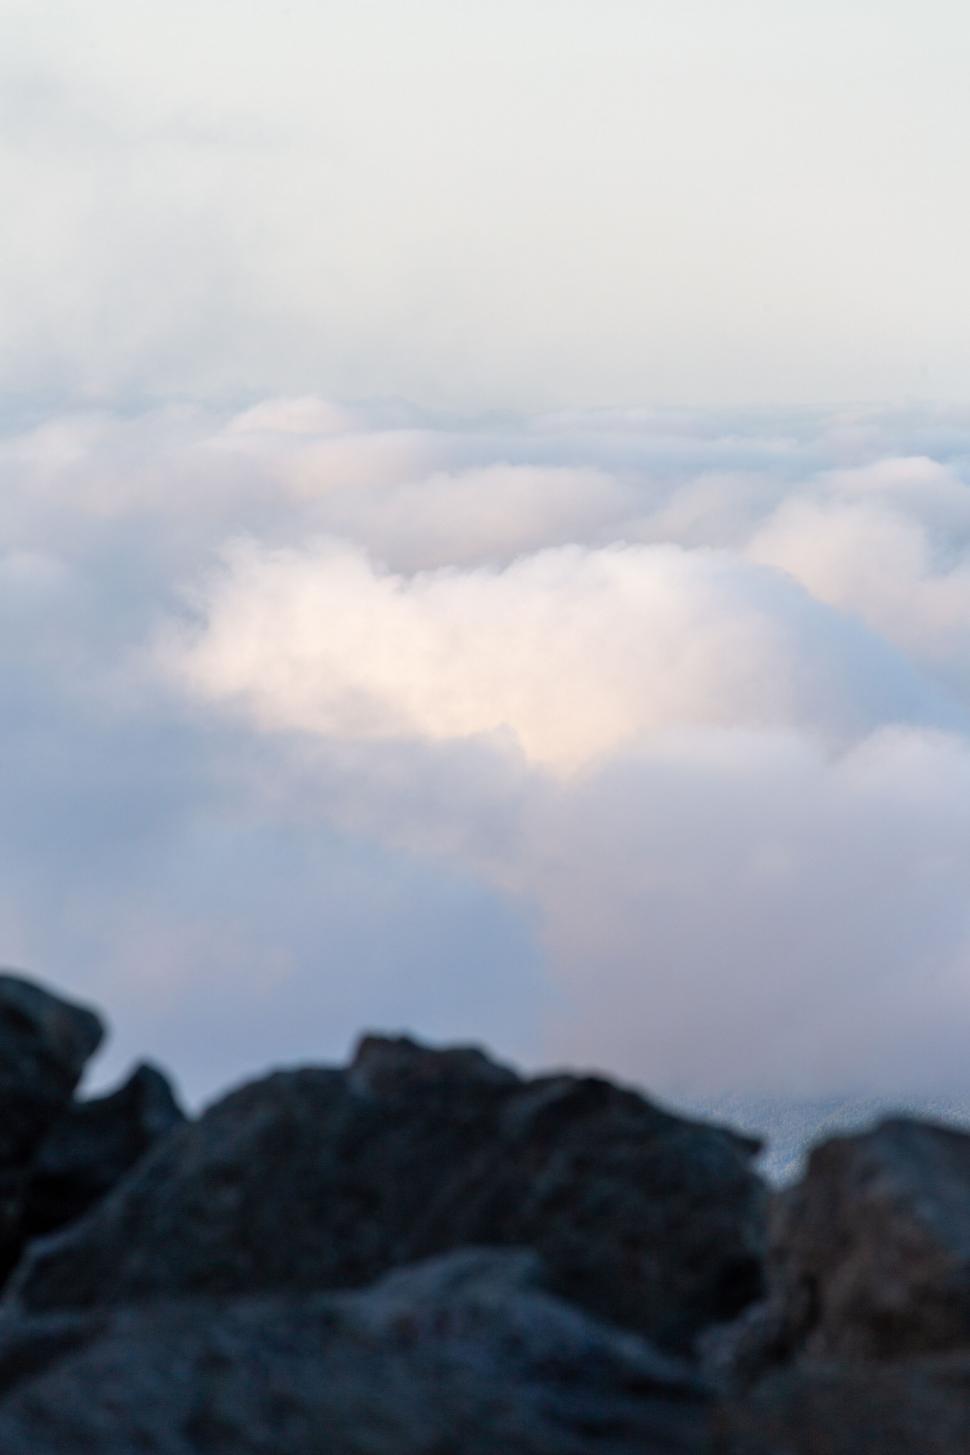 Free Image of Mysterious cloudscape over rocky terrain 